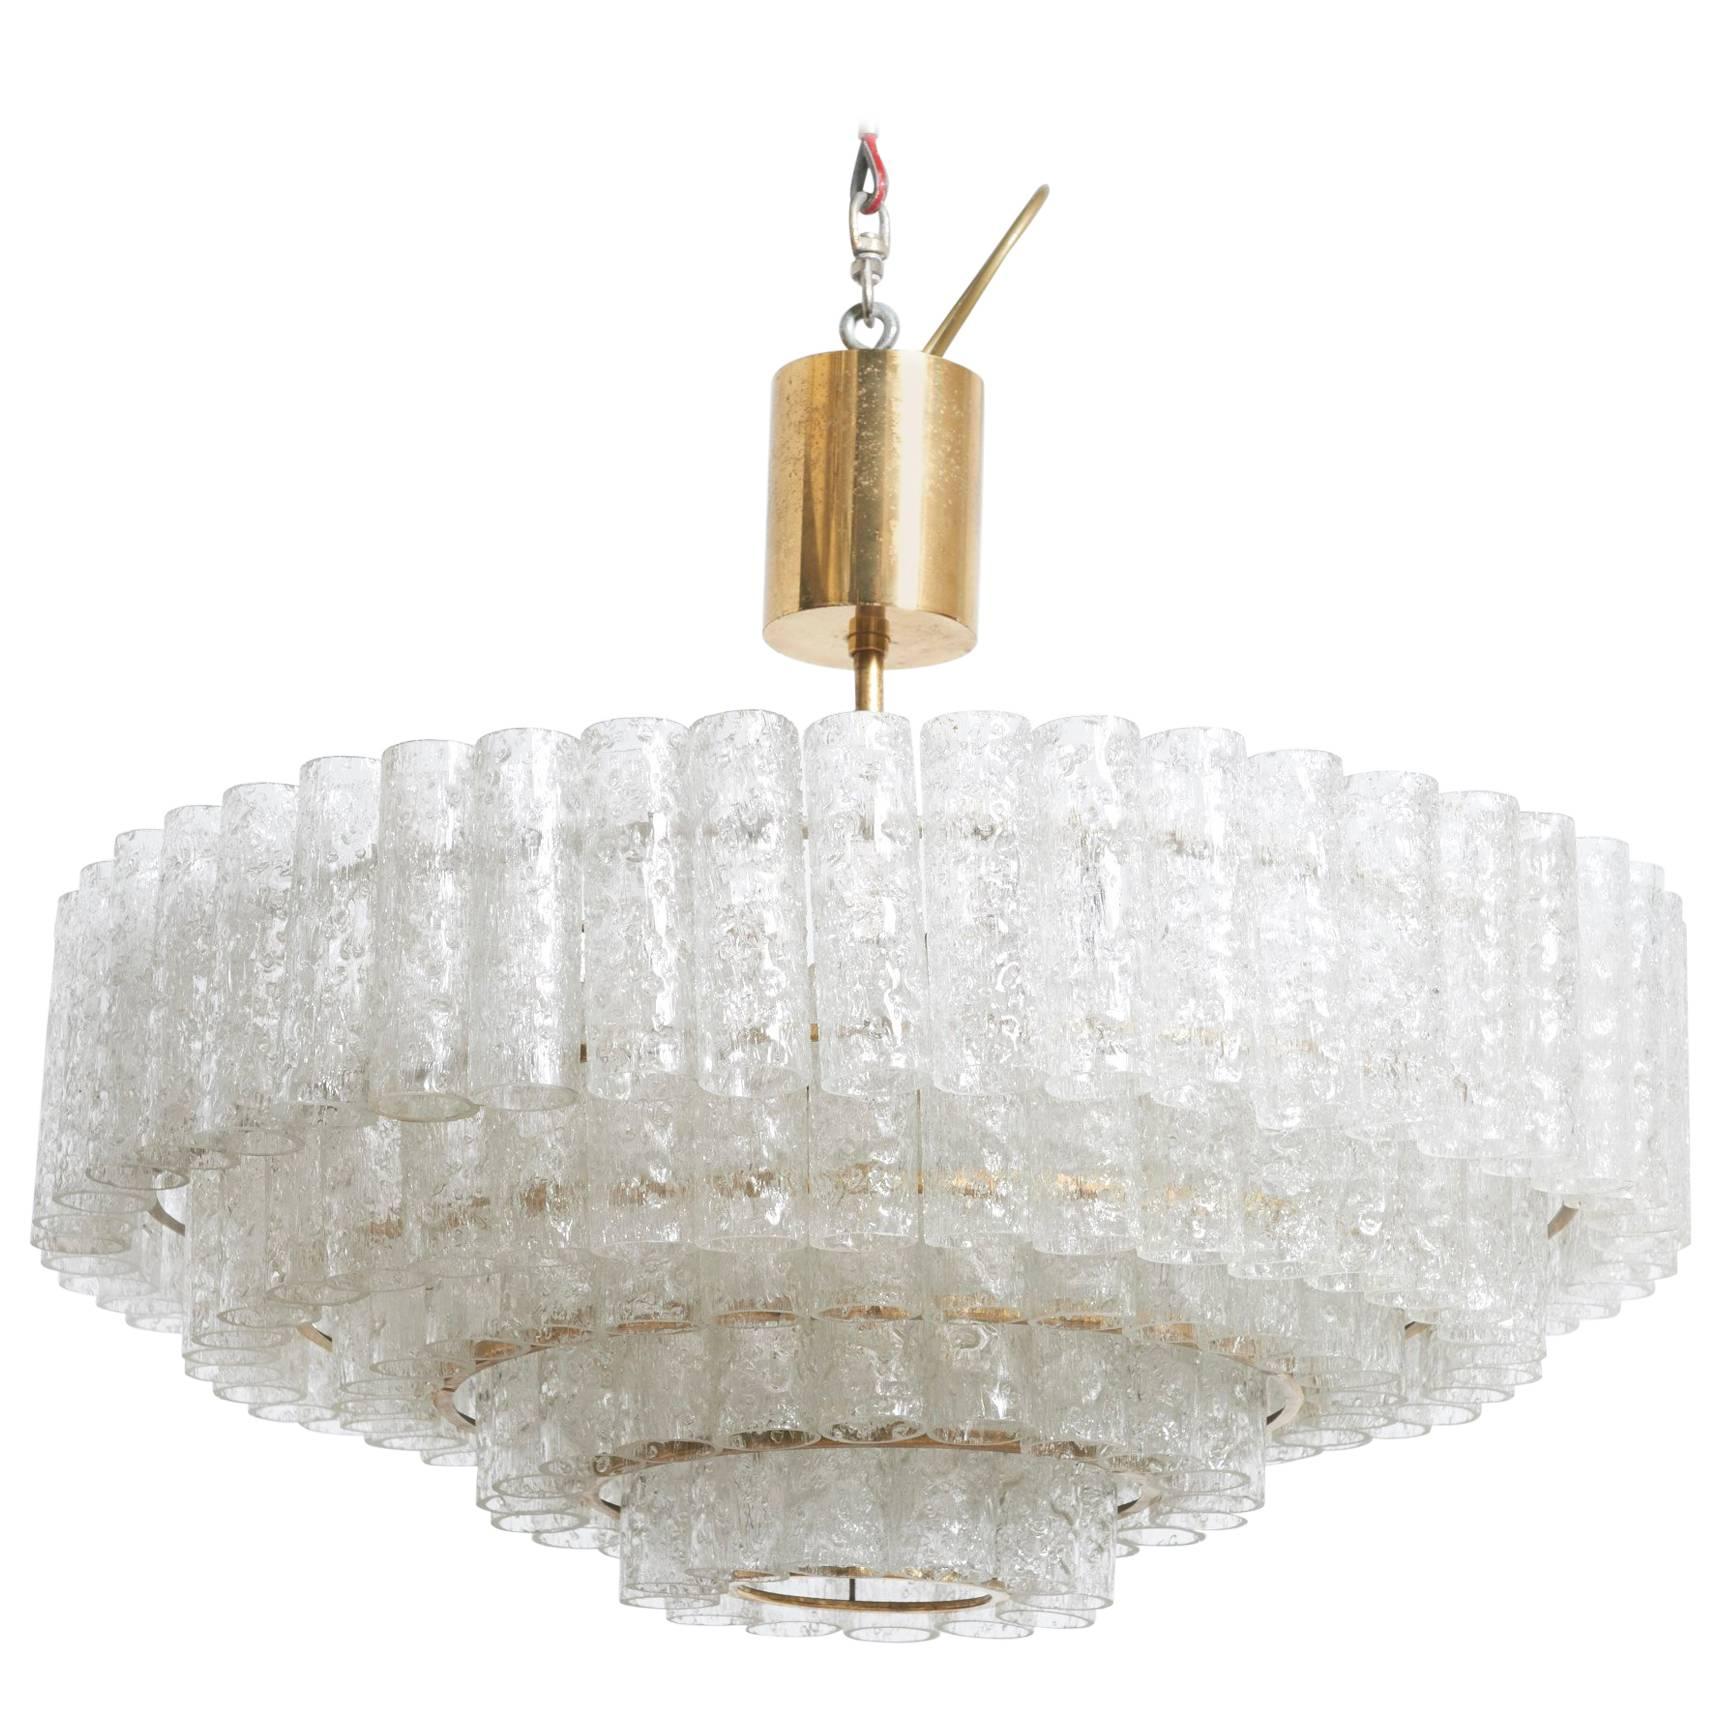 Large Five Tiers Ice Granulated Glass Tube Chandelier Designed by Doria, Germany